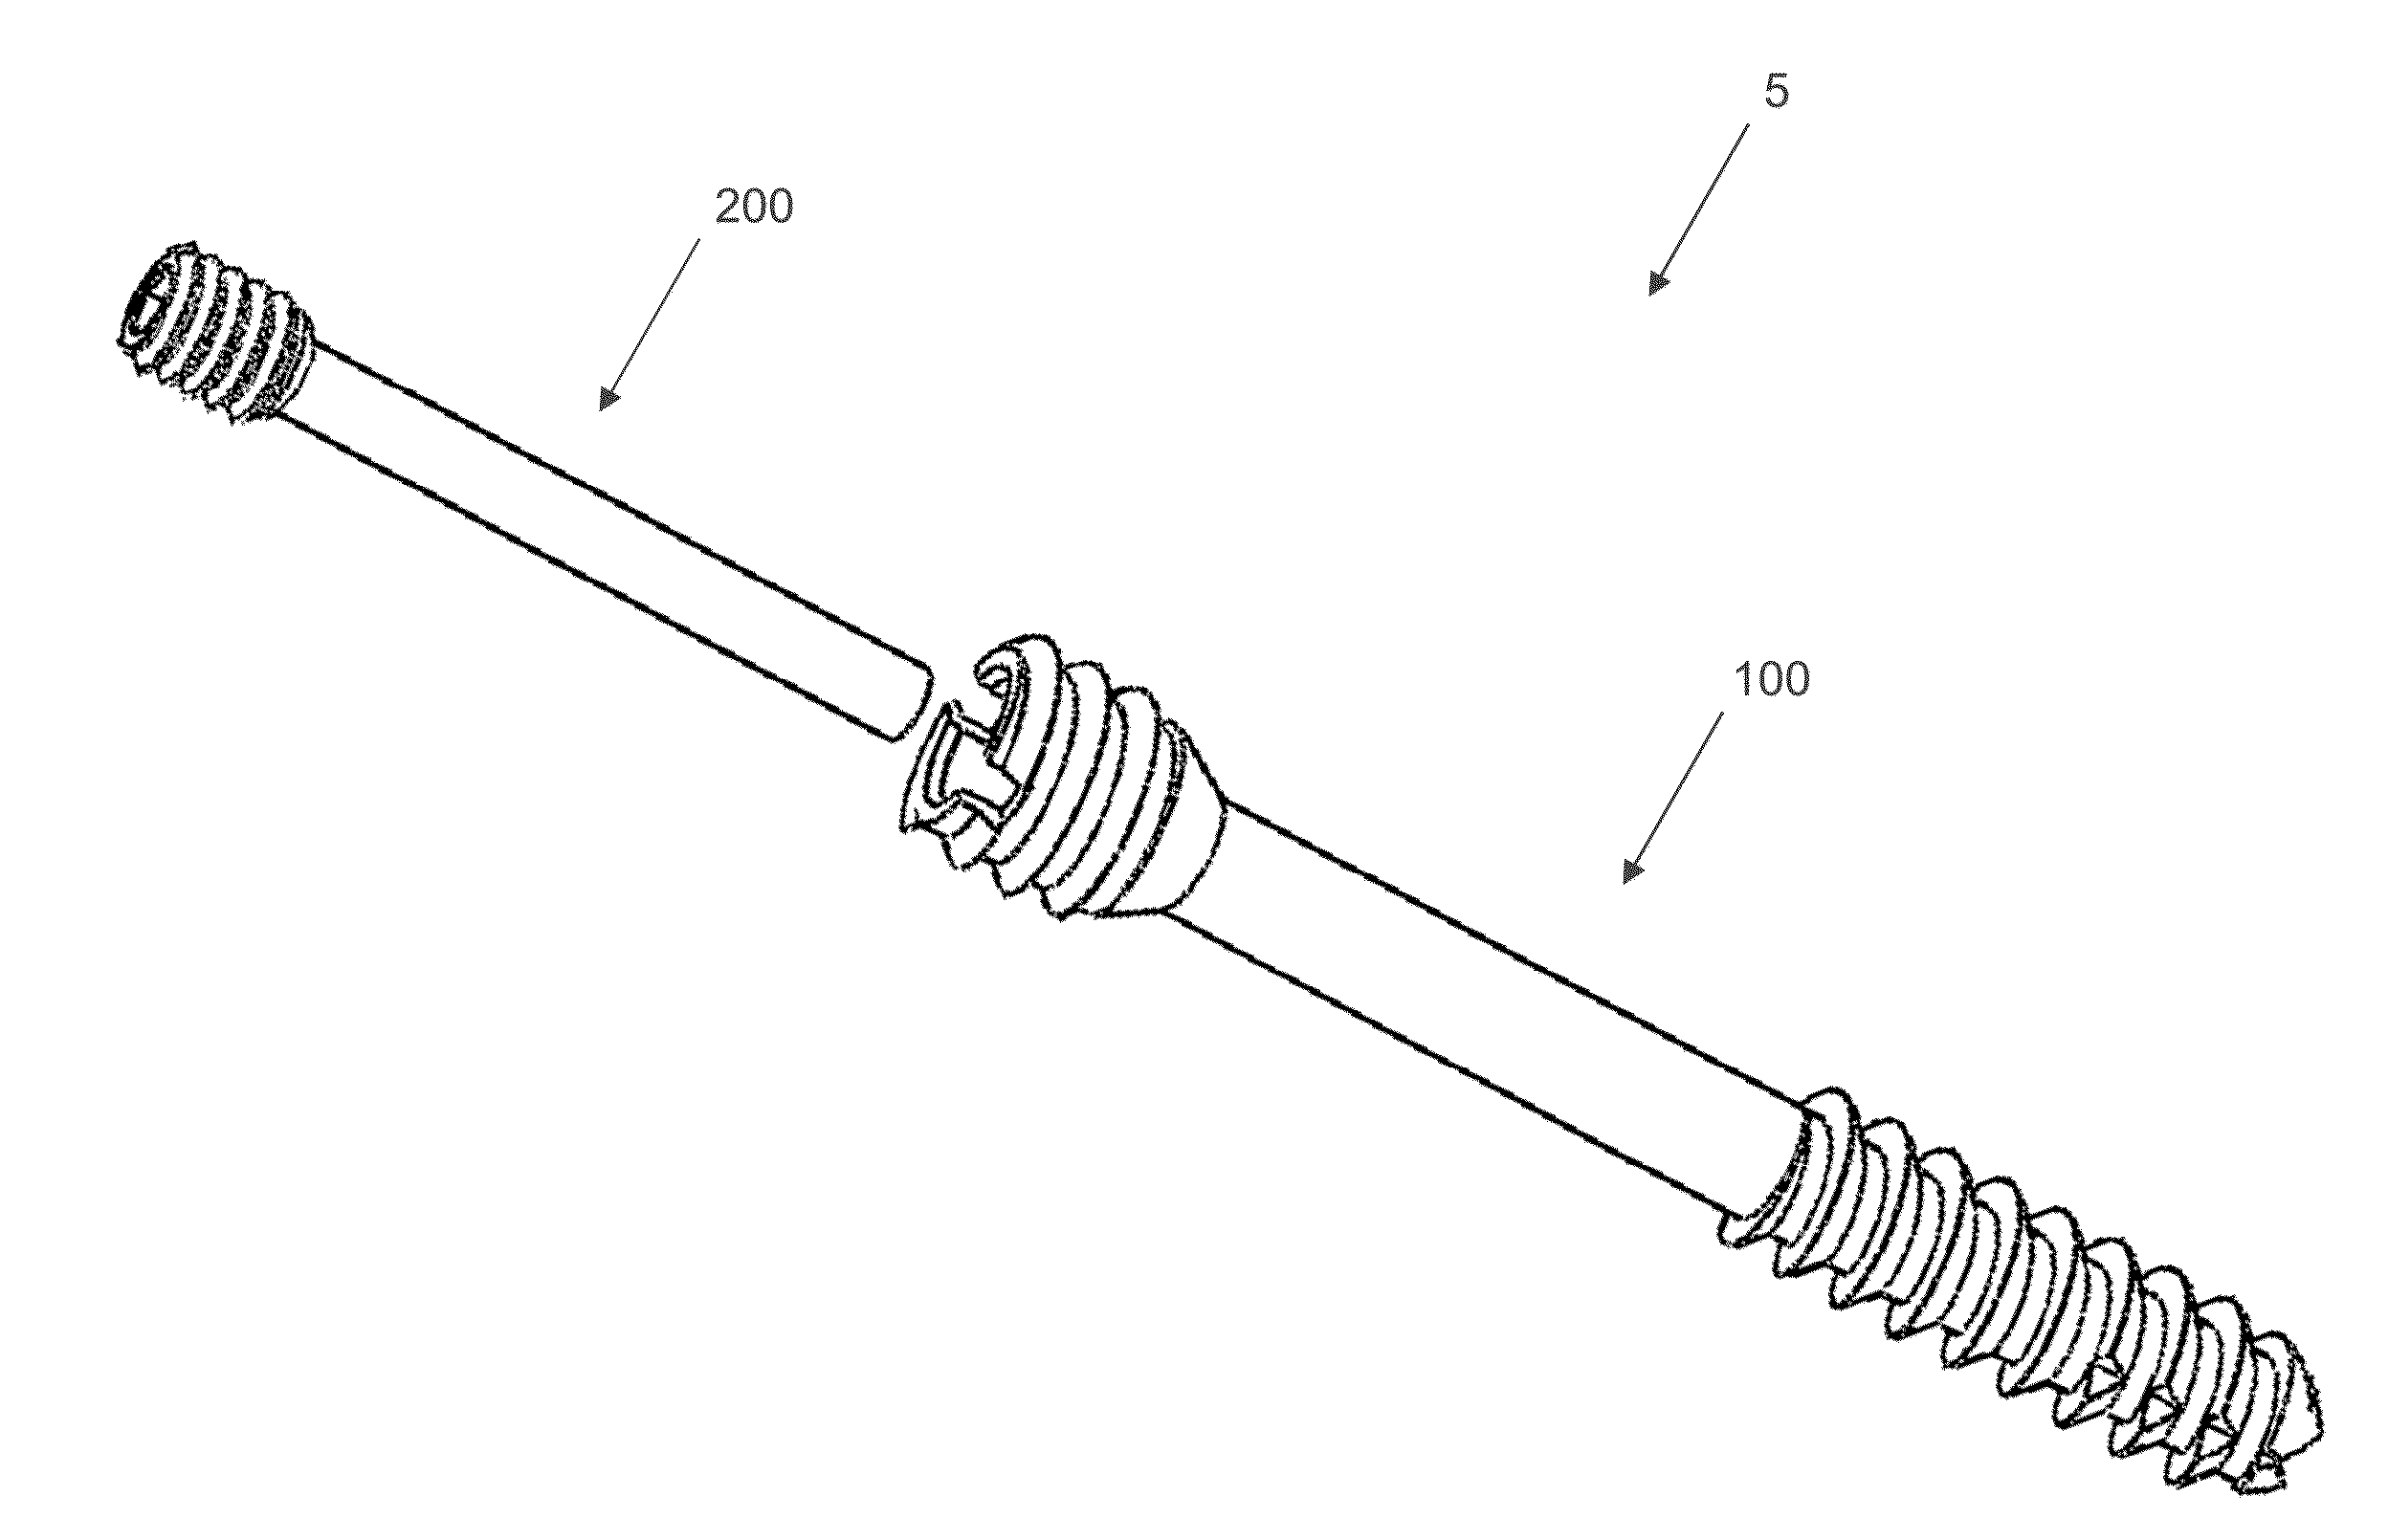 Screws for generating and applying compression within a body